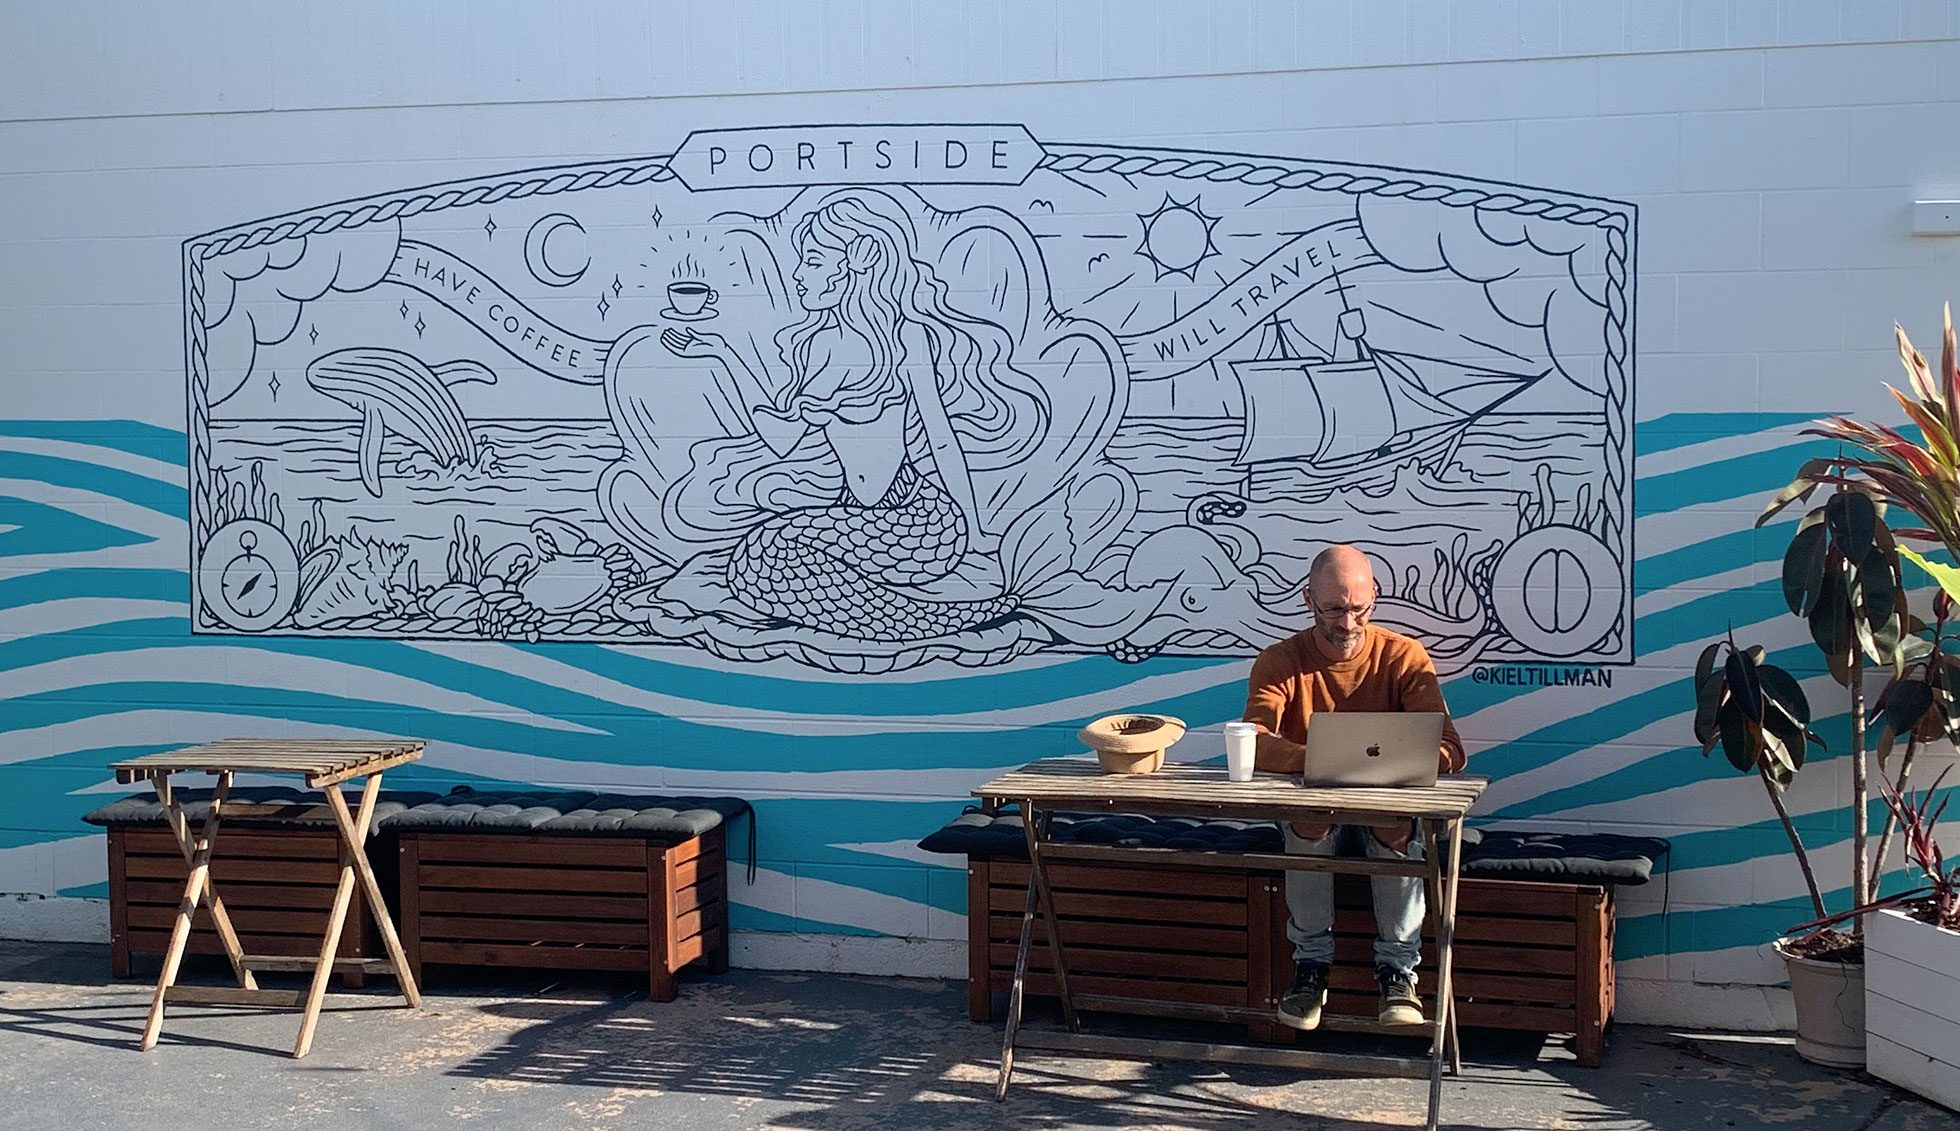 A man enjoys his coffee infront of Portside's outdoor mural, which features a mermaid, ships, ocean and the sun